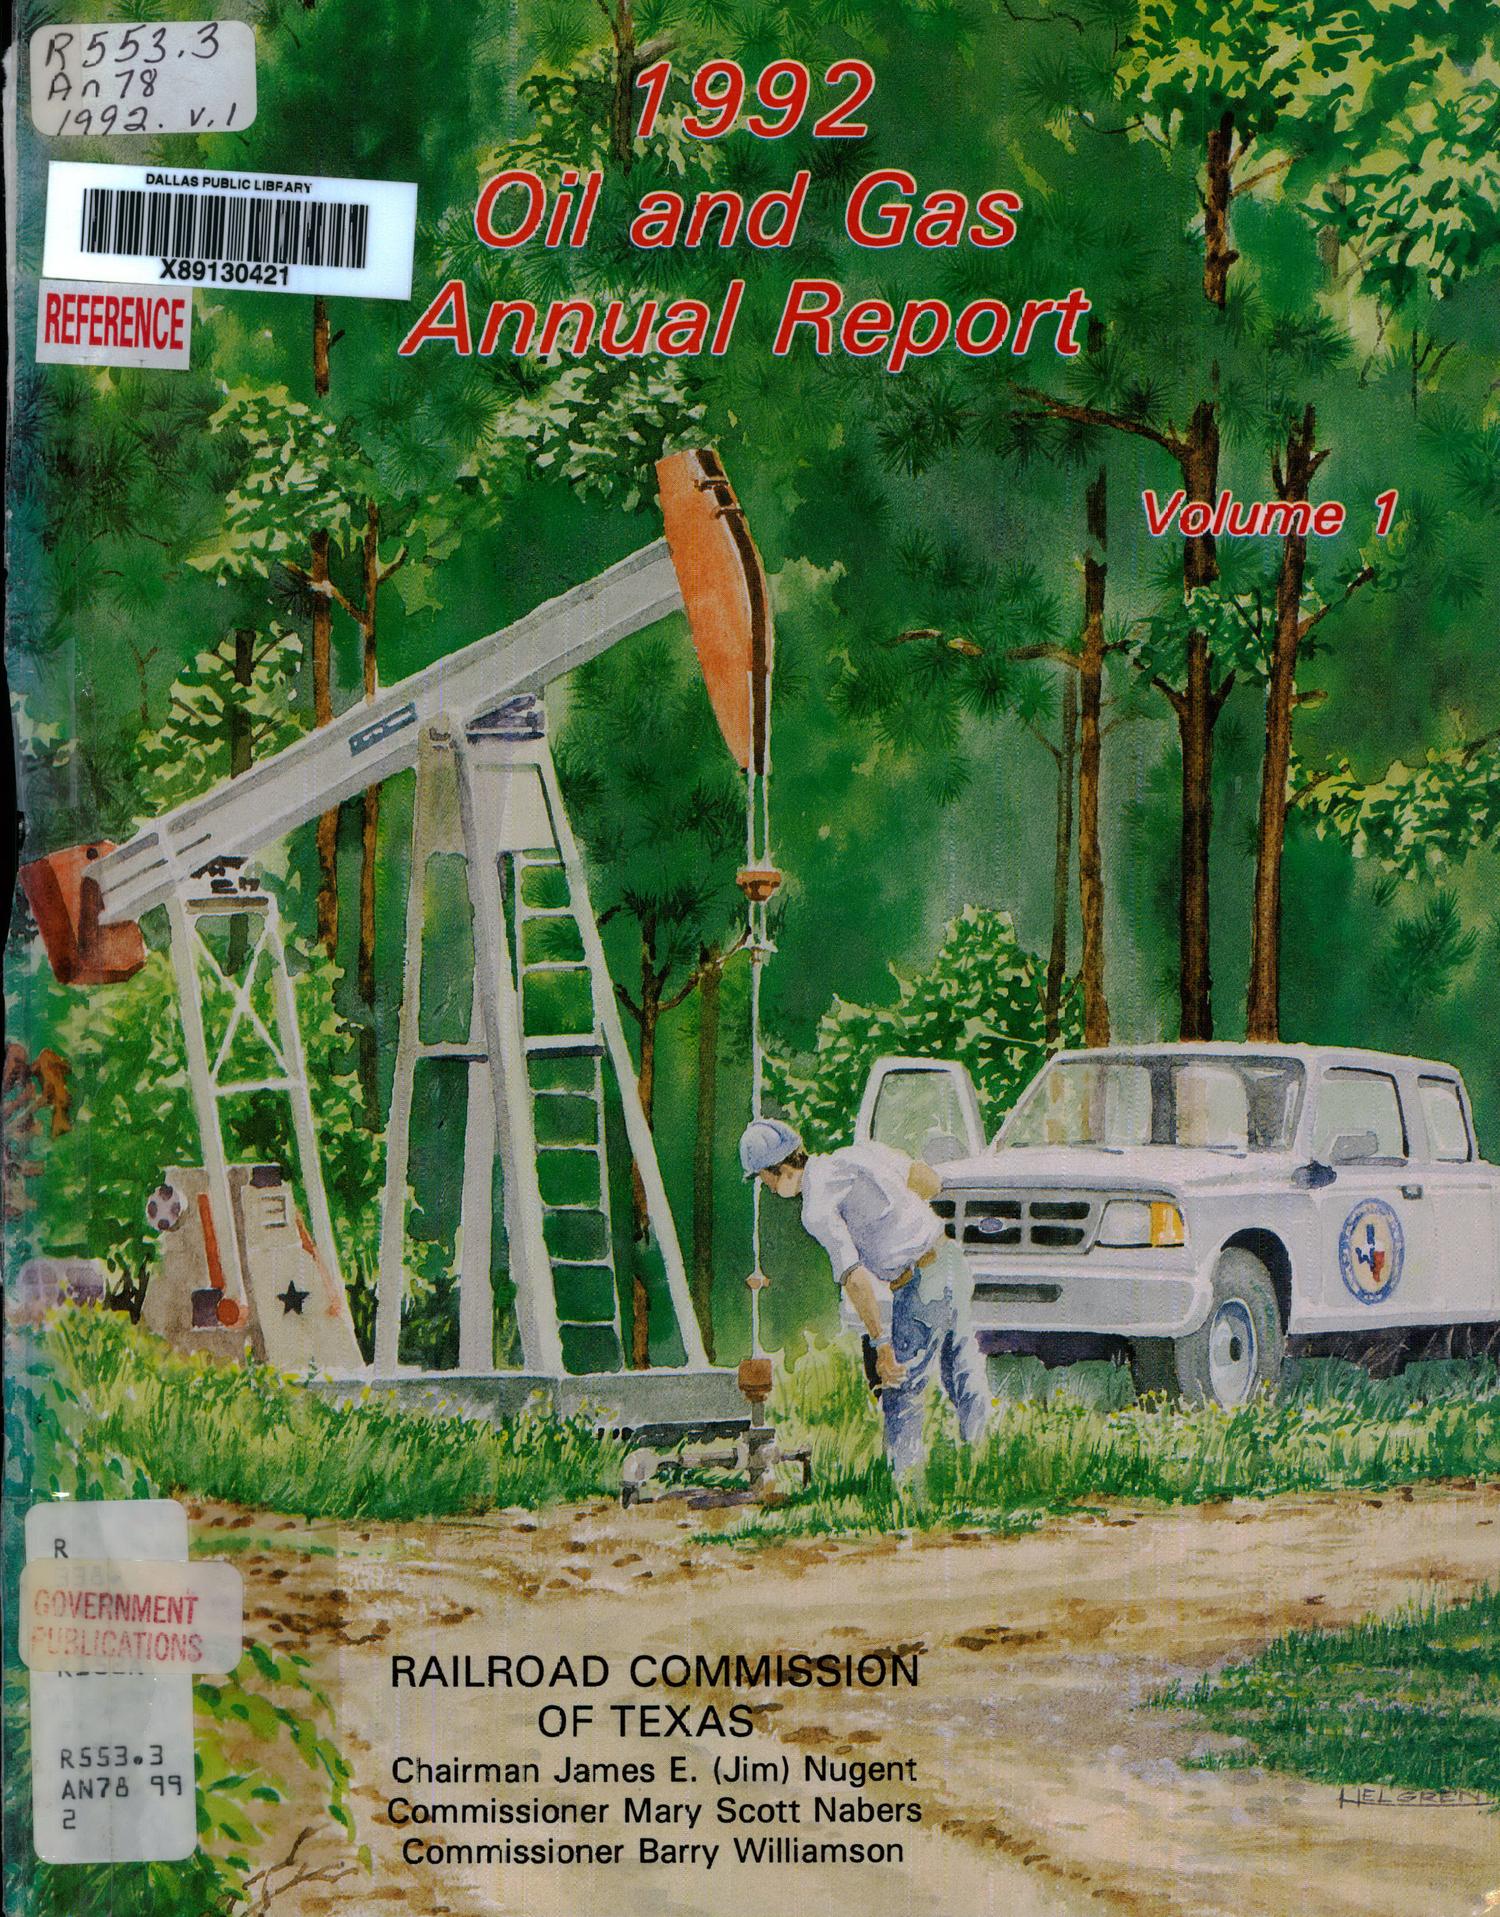 Railroad Commission of Texas Oil and Gas Division Annual Report: 1992, Volume 1
                                                
                                                    FRONT COVER
                                                